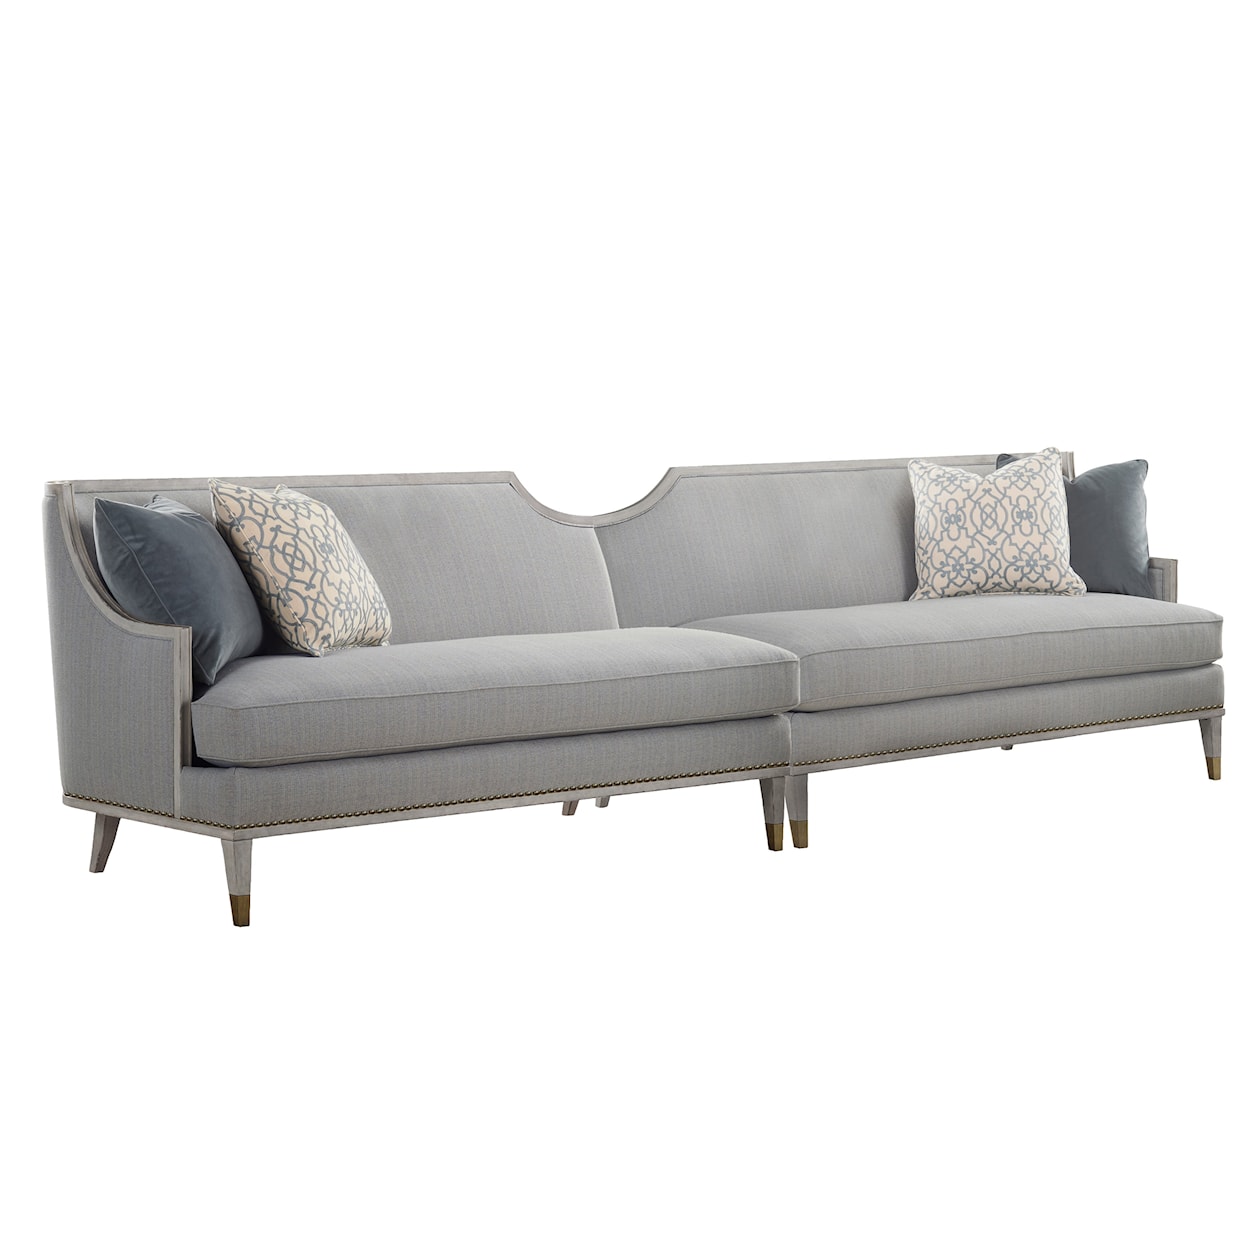 A.R.T. Furniture Inc 161 - Intrigue 2-Piece Sectional Sofa